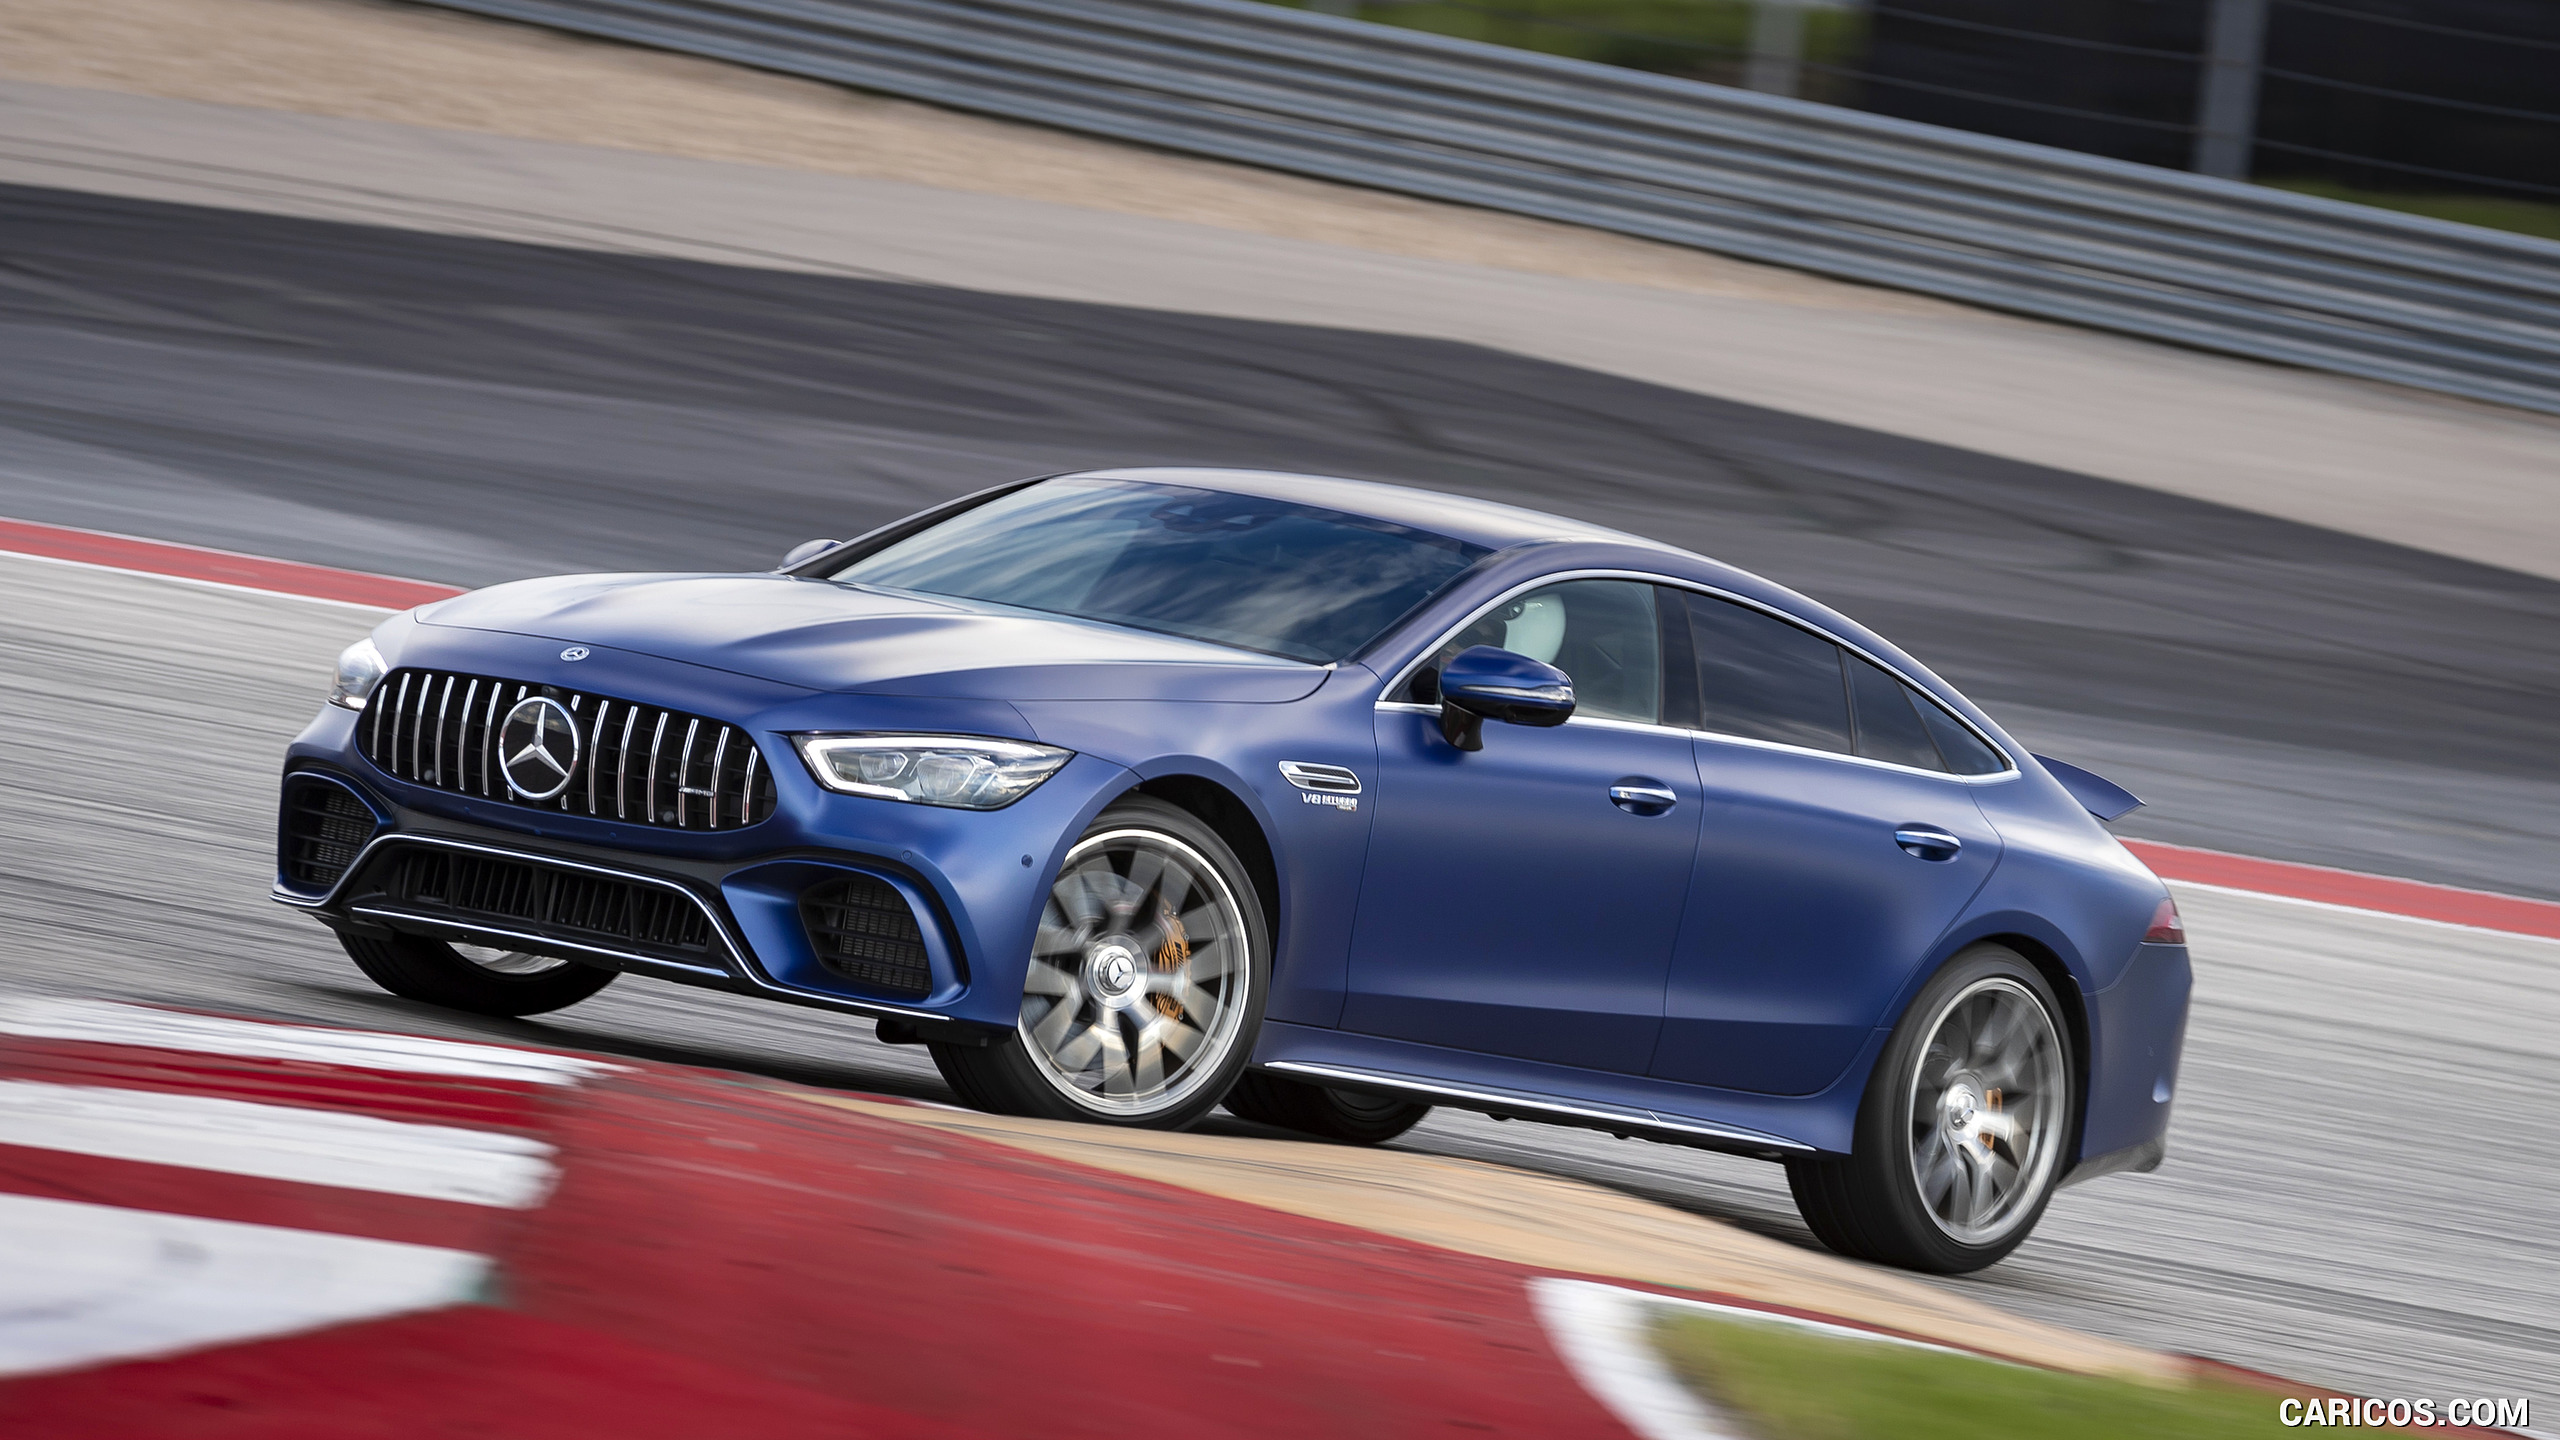 2019 Mercedes-AMG GT 63 S 4MATIC+ 4-Door Coupe - Front Three-Quarter, #101 of 427